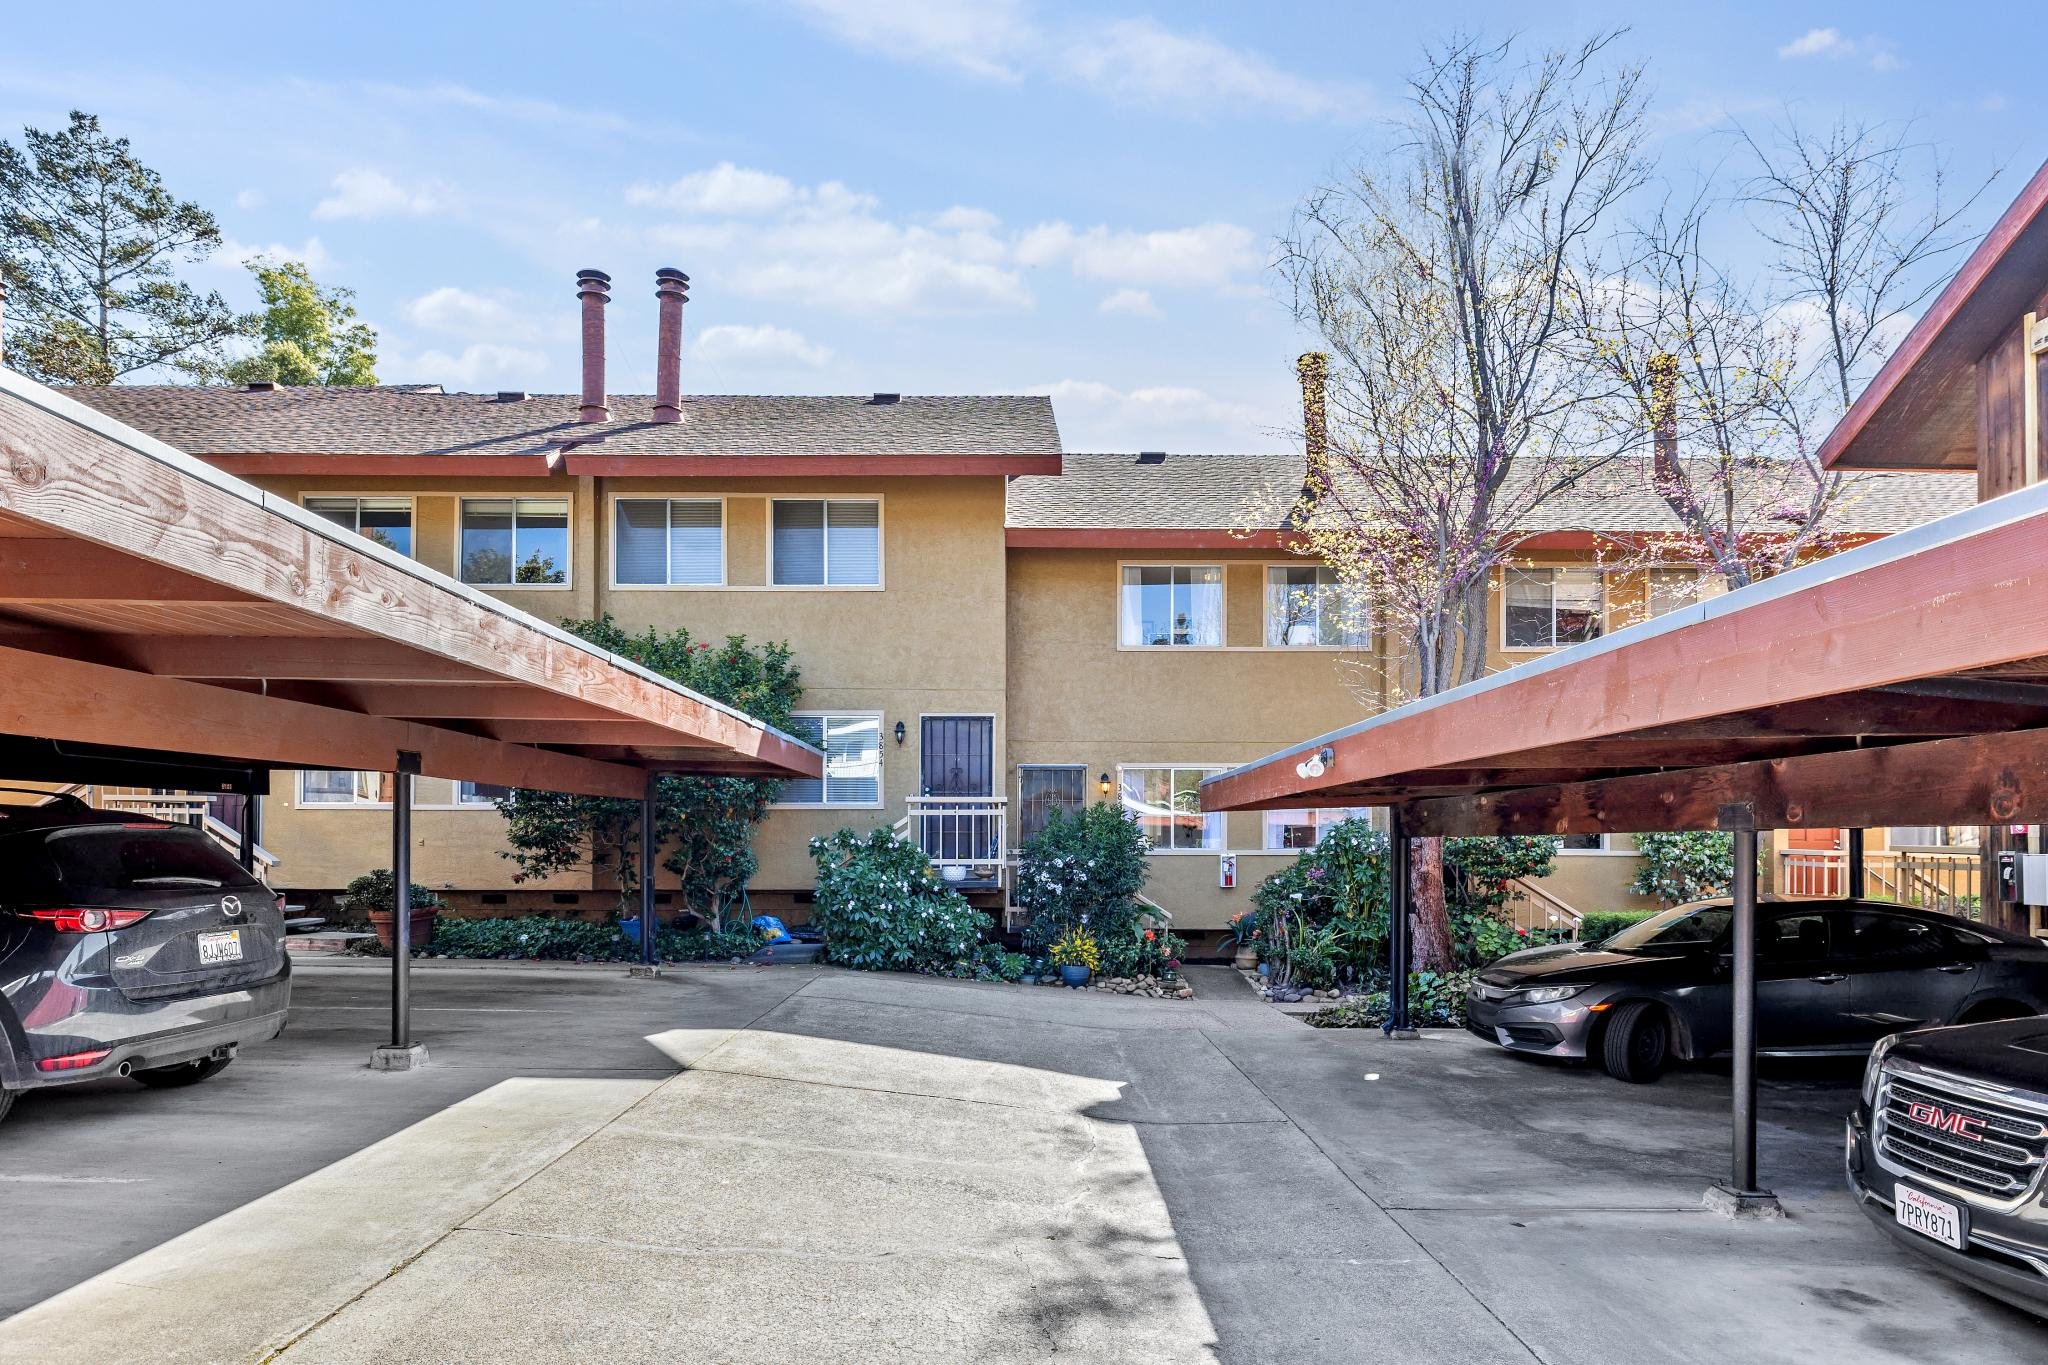 3852 Maybelle Ave, Unit 5, Oakland, CA 94619